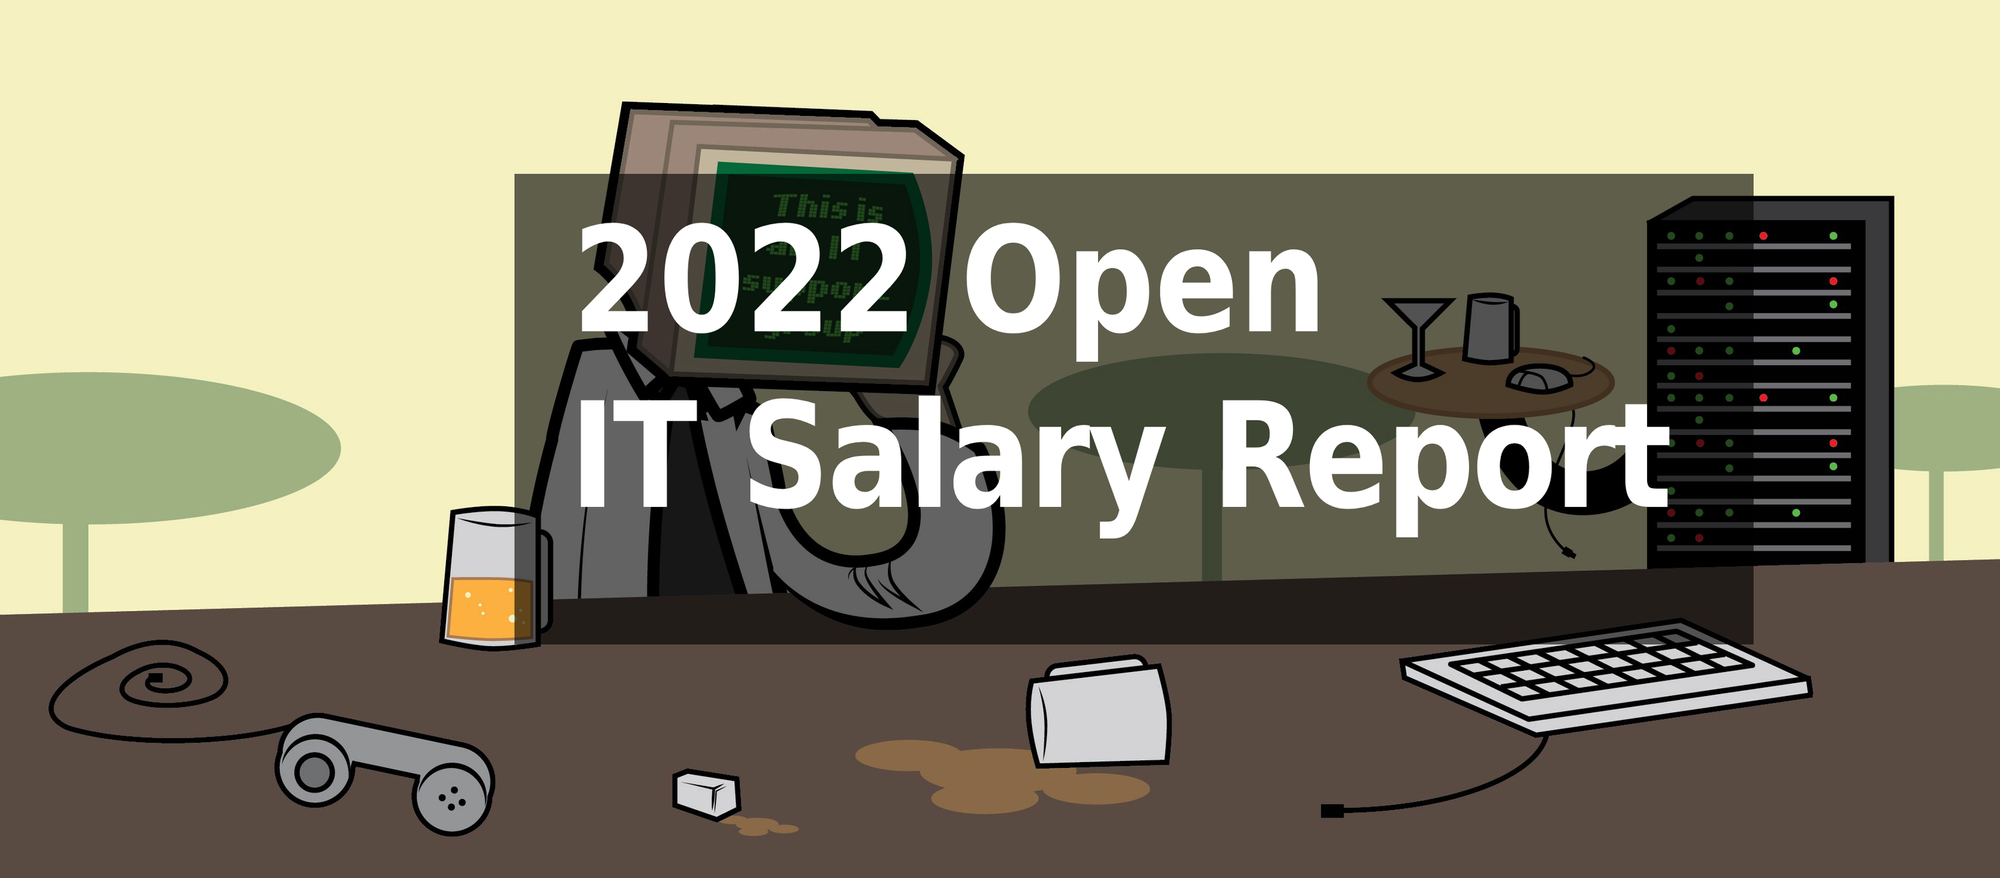 Featured image for “2022 Open IT Salary Report”